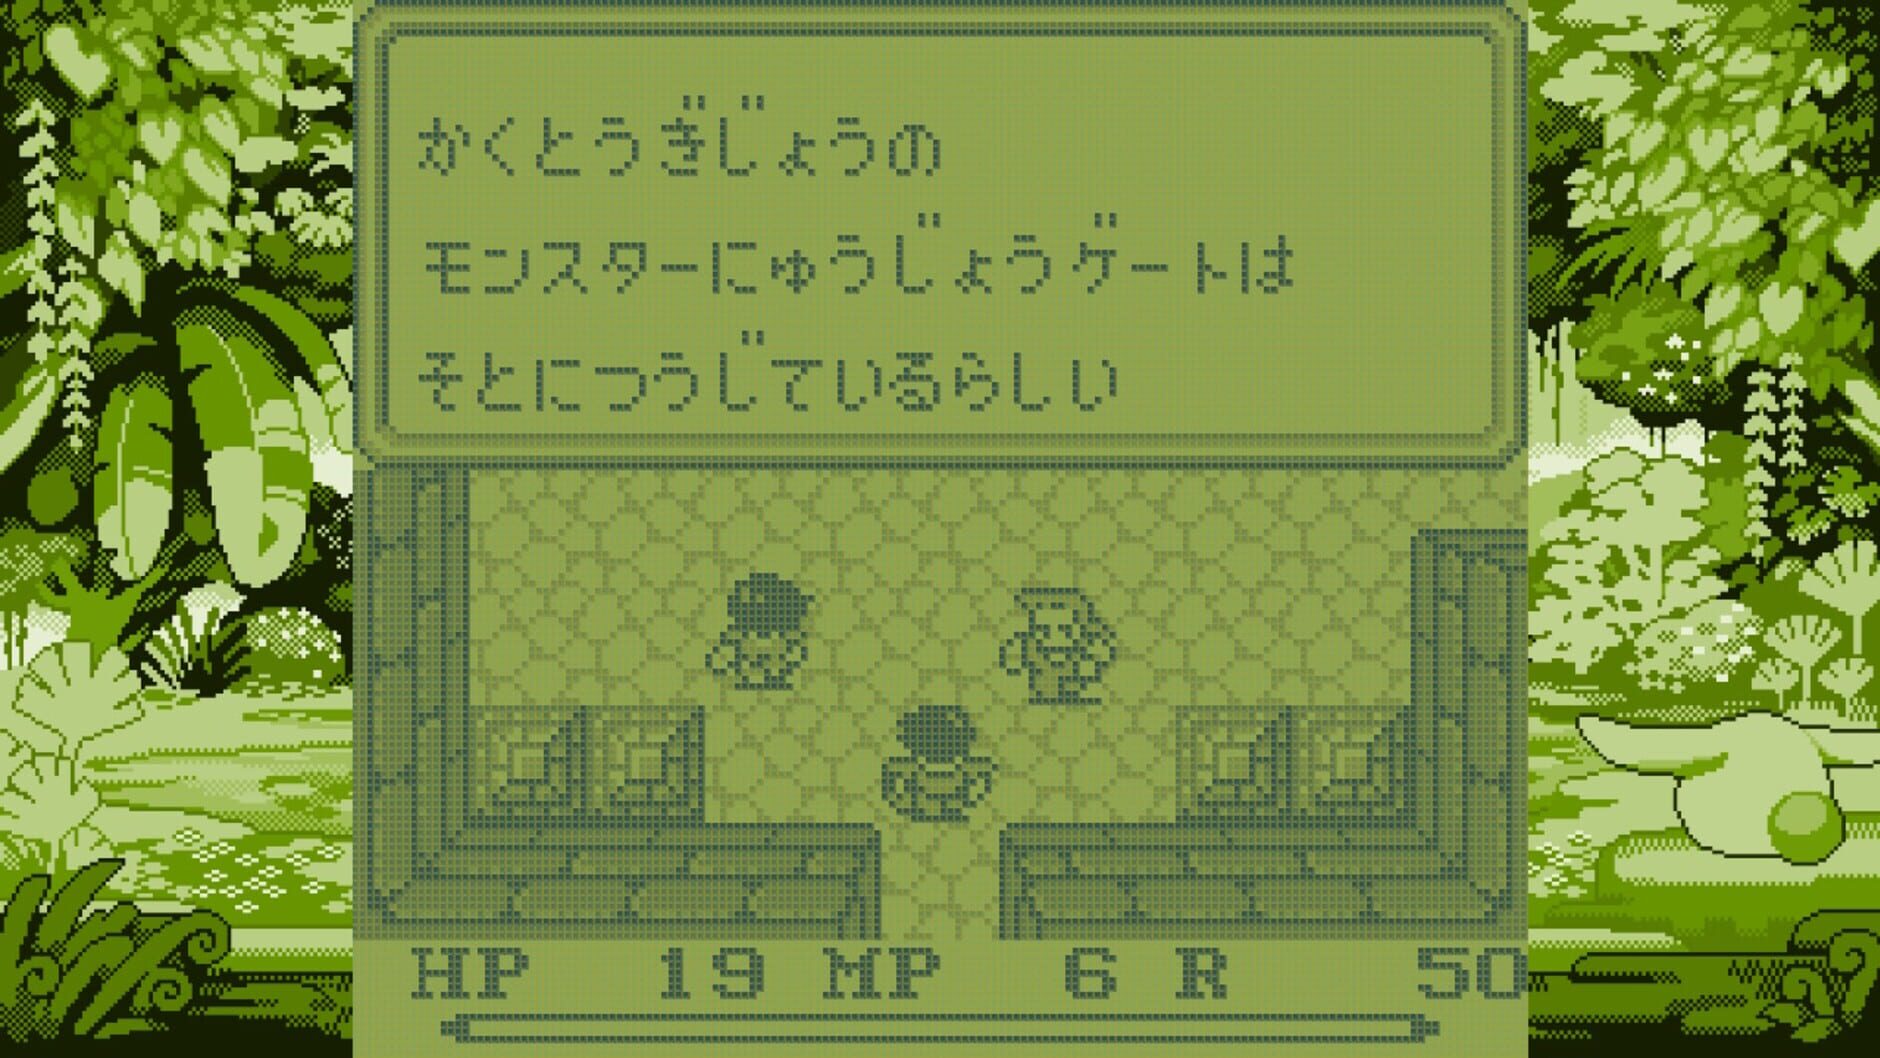 Screenshot for Collection of Mana